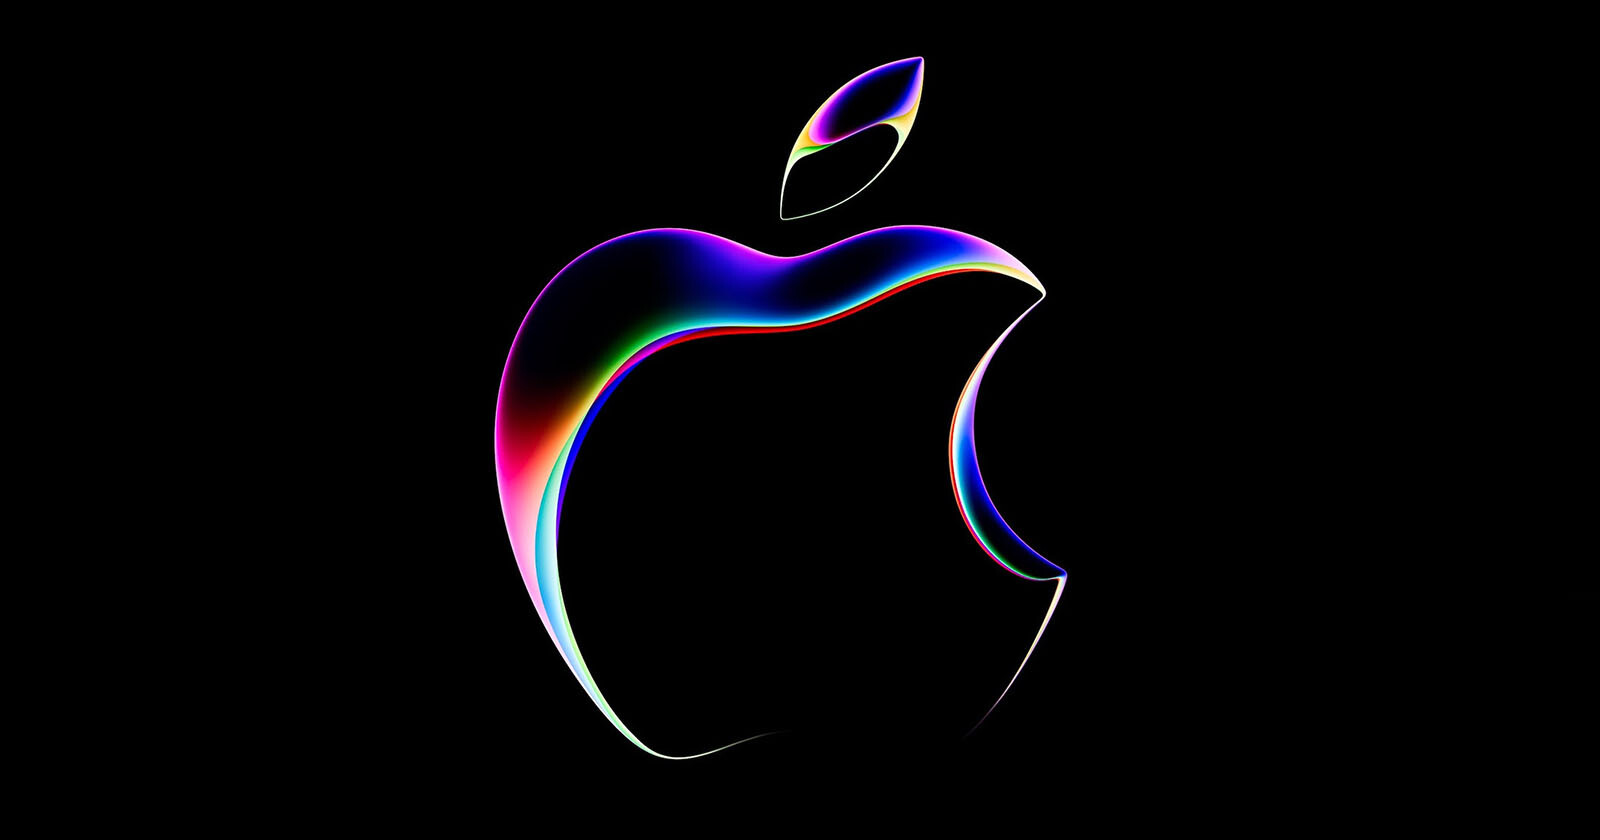 What to Expect at WWDC 2023: AR/VR Headset, New Mac Studio, Mac Pro